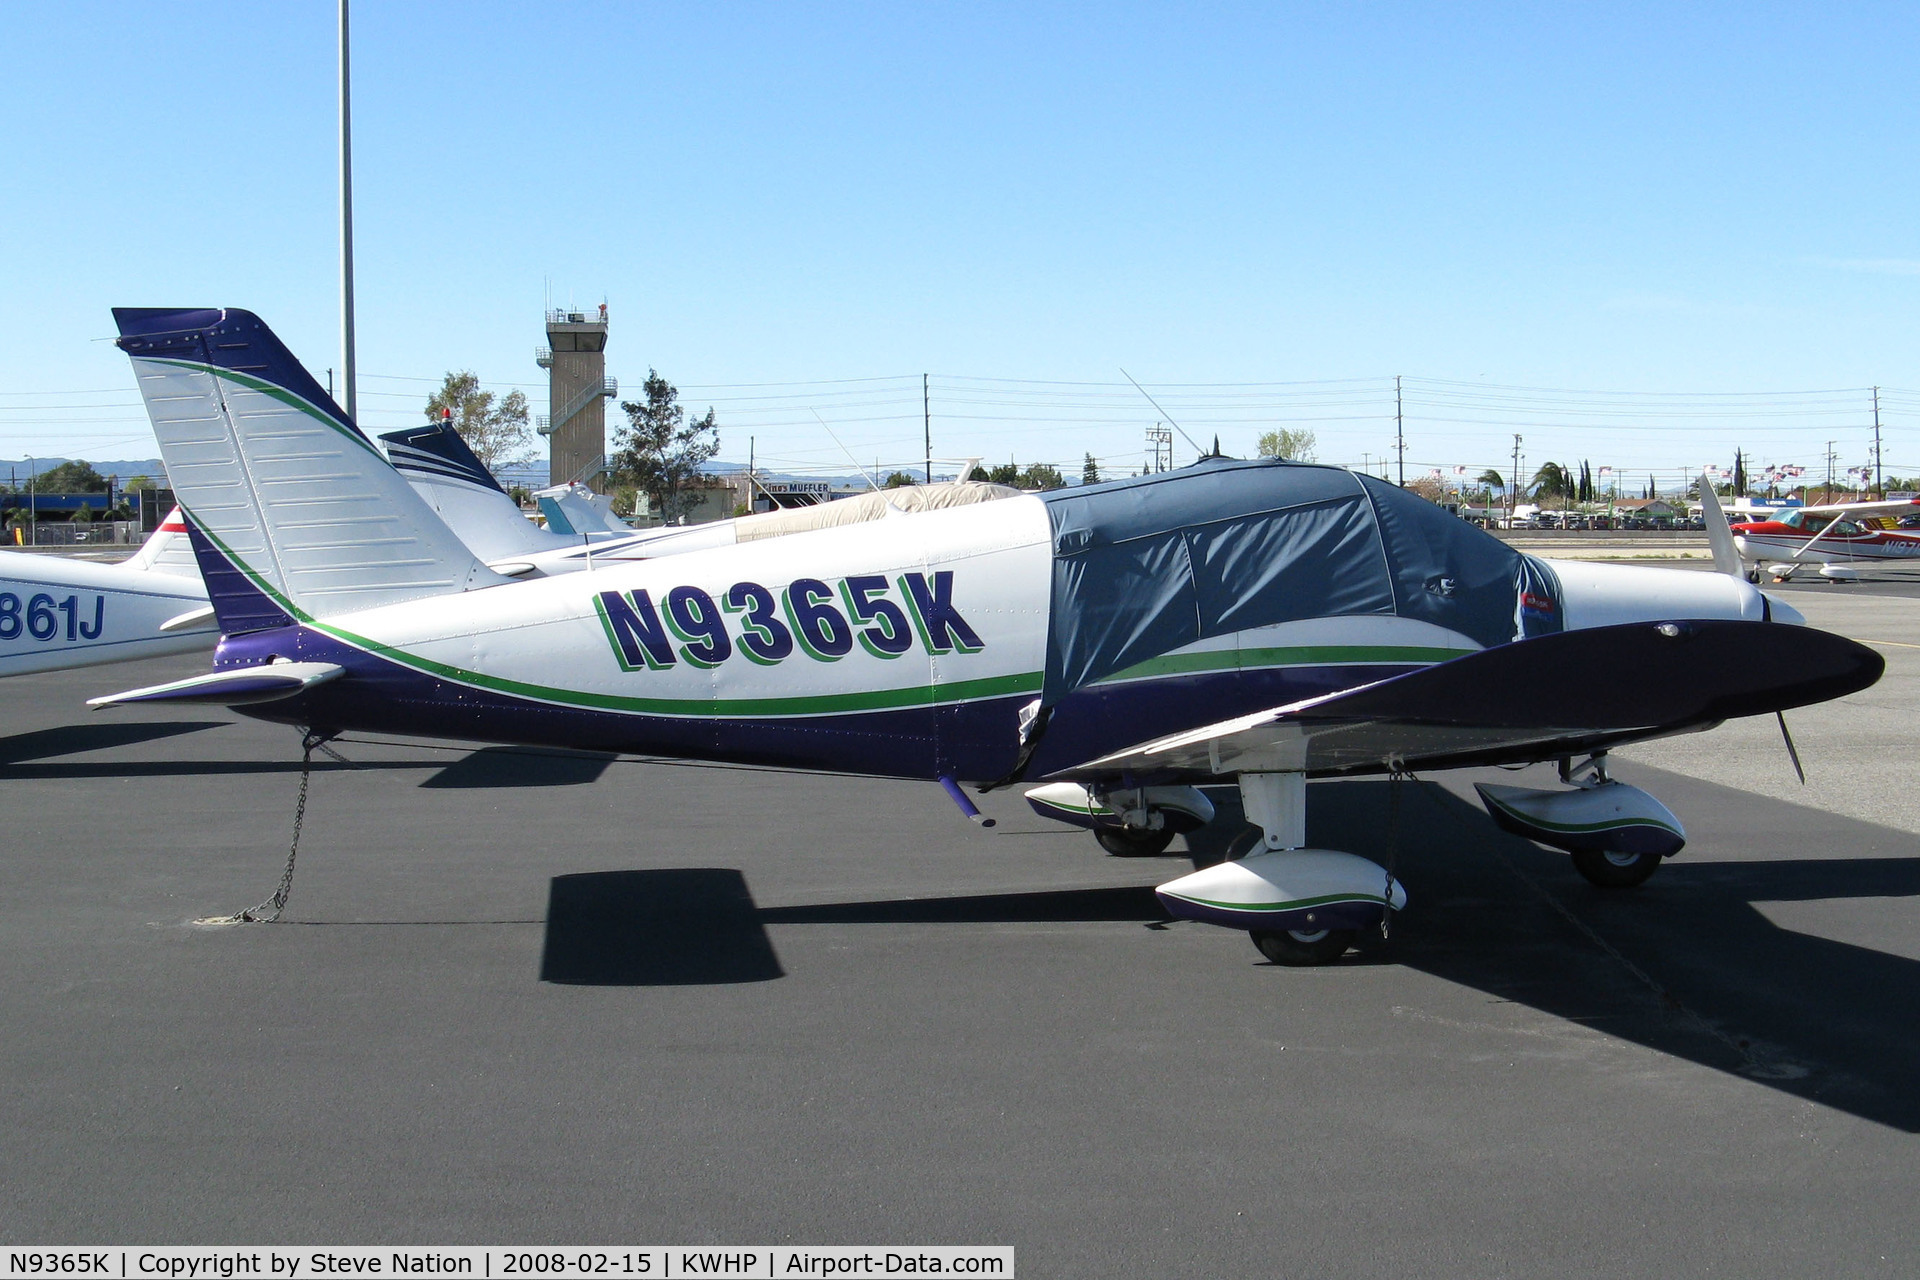 N9365K, 1976 Piper PA-28-140 Cherokee C/N 28-7625177, 1976 Piper PA-28-140 with cabin cover @ Whiteman Airport, Pacoima, CA